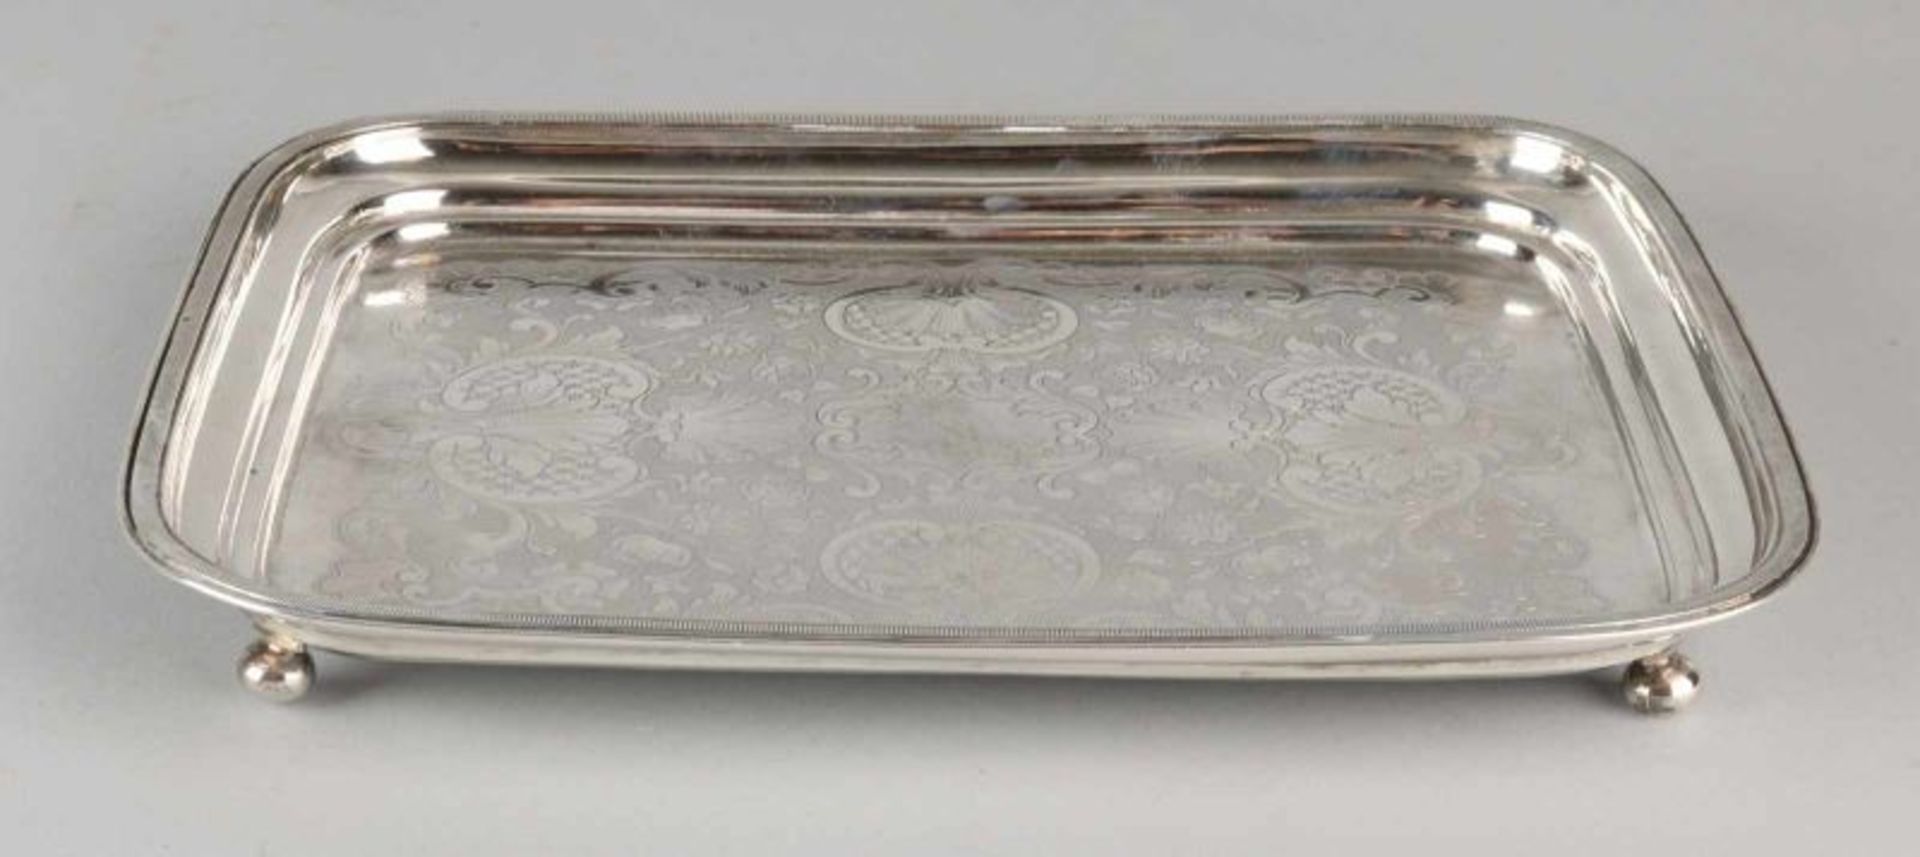 Beautiful silver cabaret, 934/000, rectangular model with increasing knerrenrand. In the middle